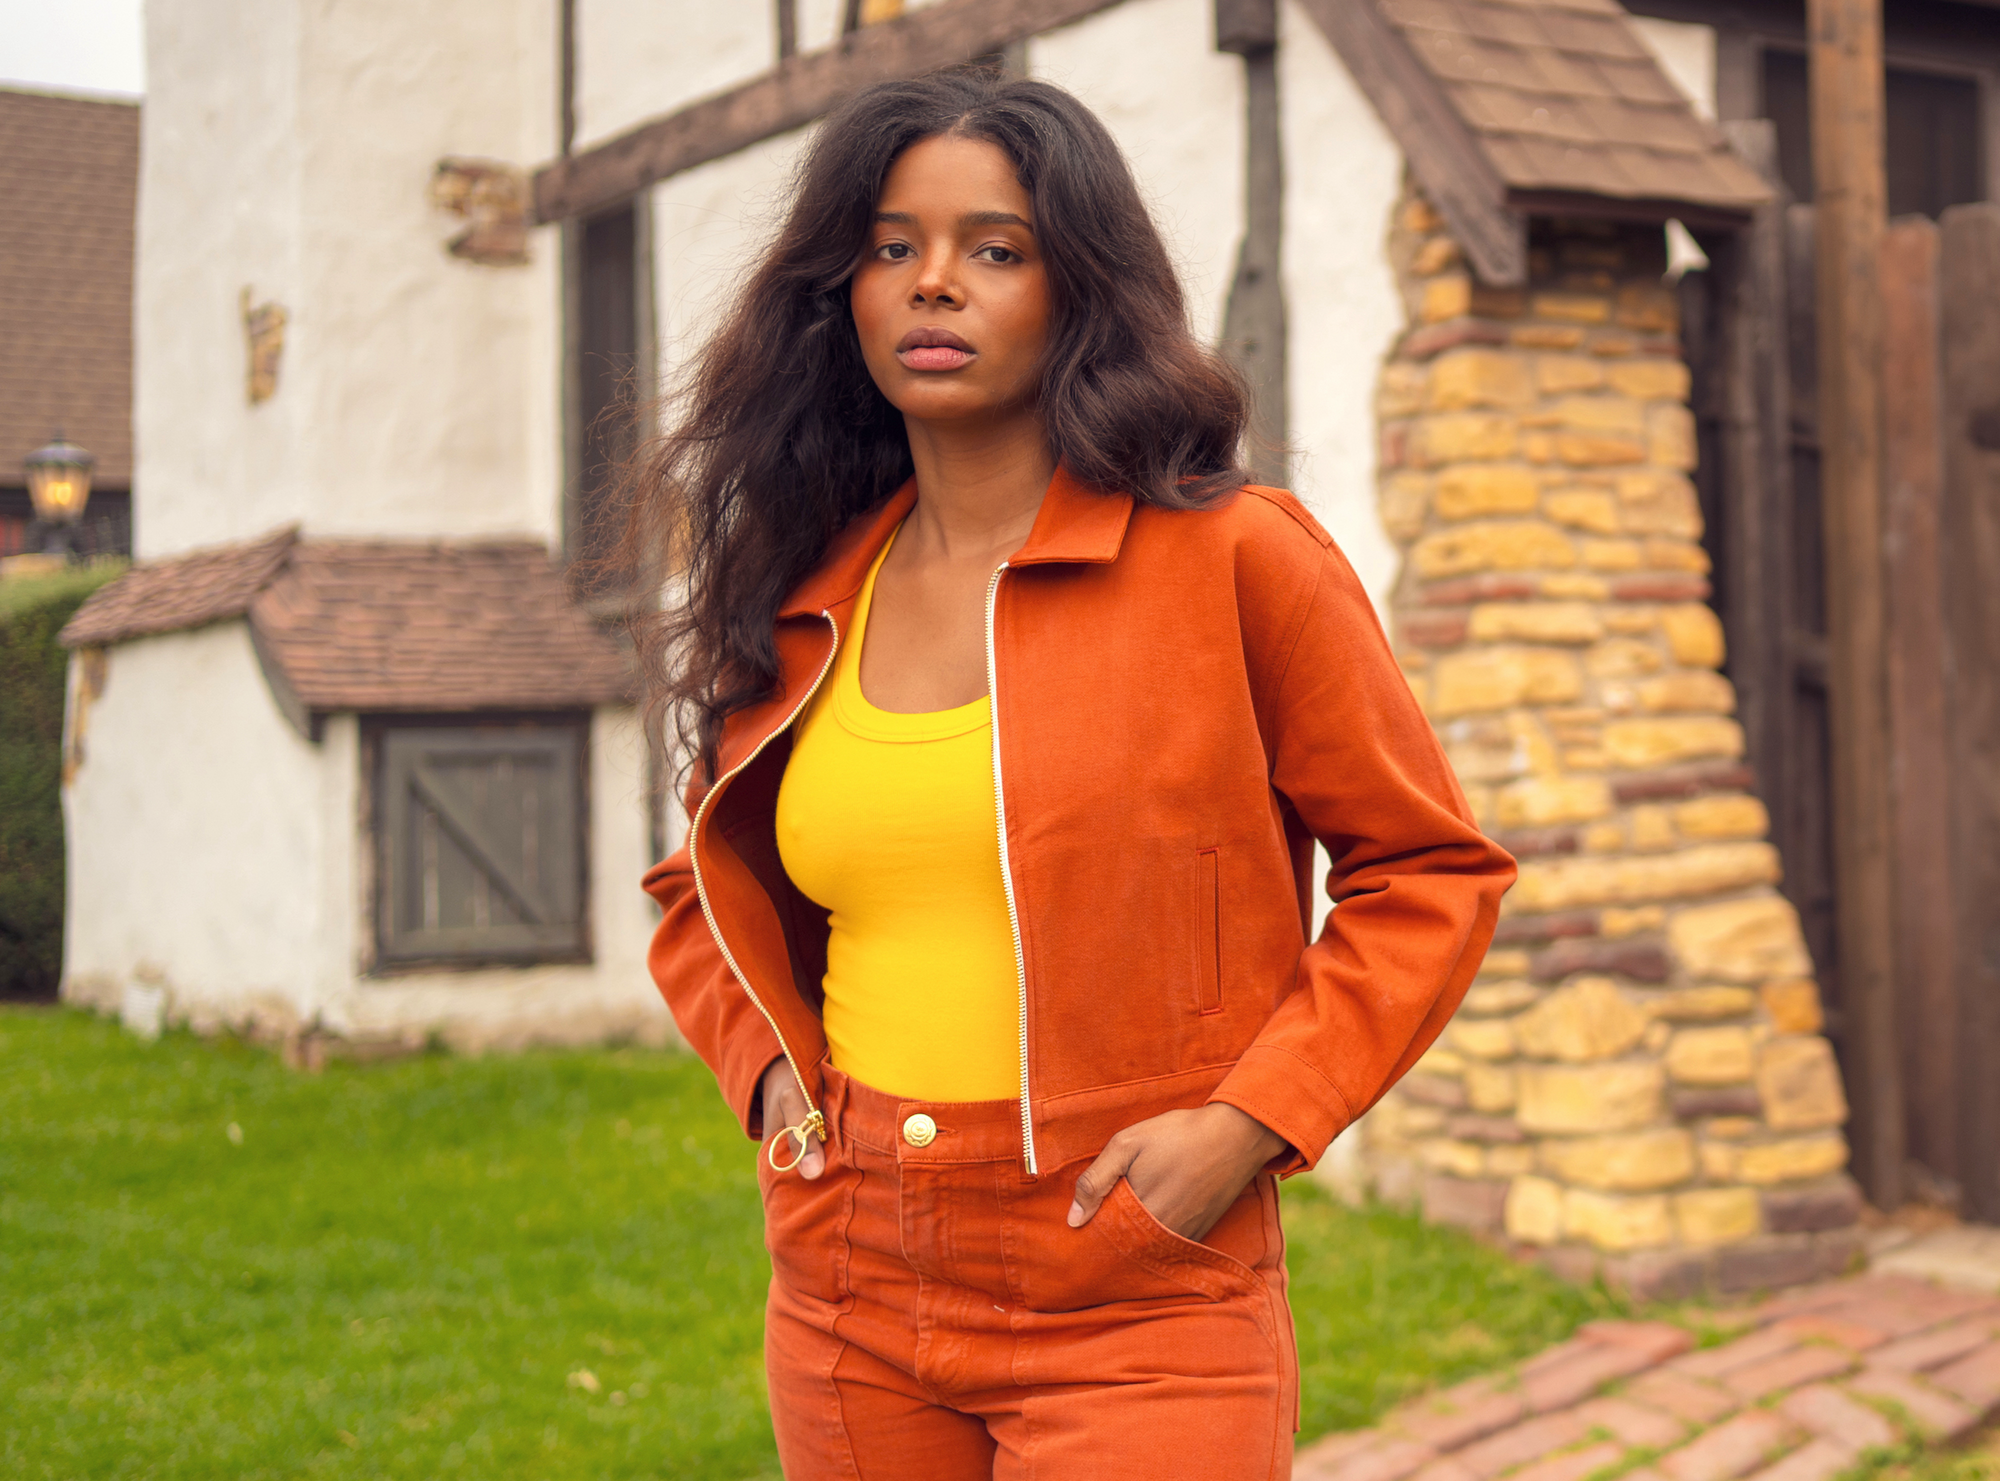 Kandia is wearing Ricky Jacket in Burnt Terracotta, Tank Top in Sunshine Yellow, and Work Pants in Burnt Terracotta